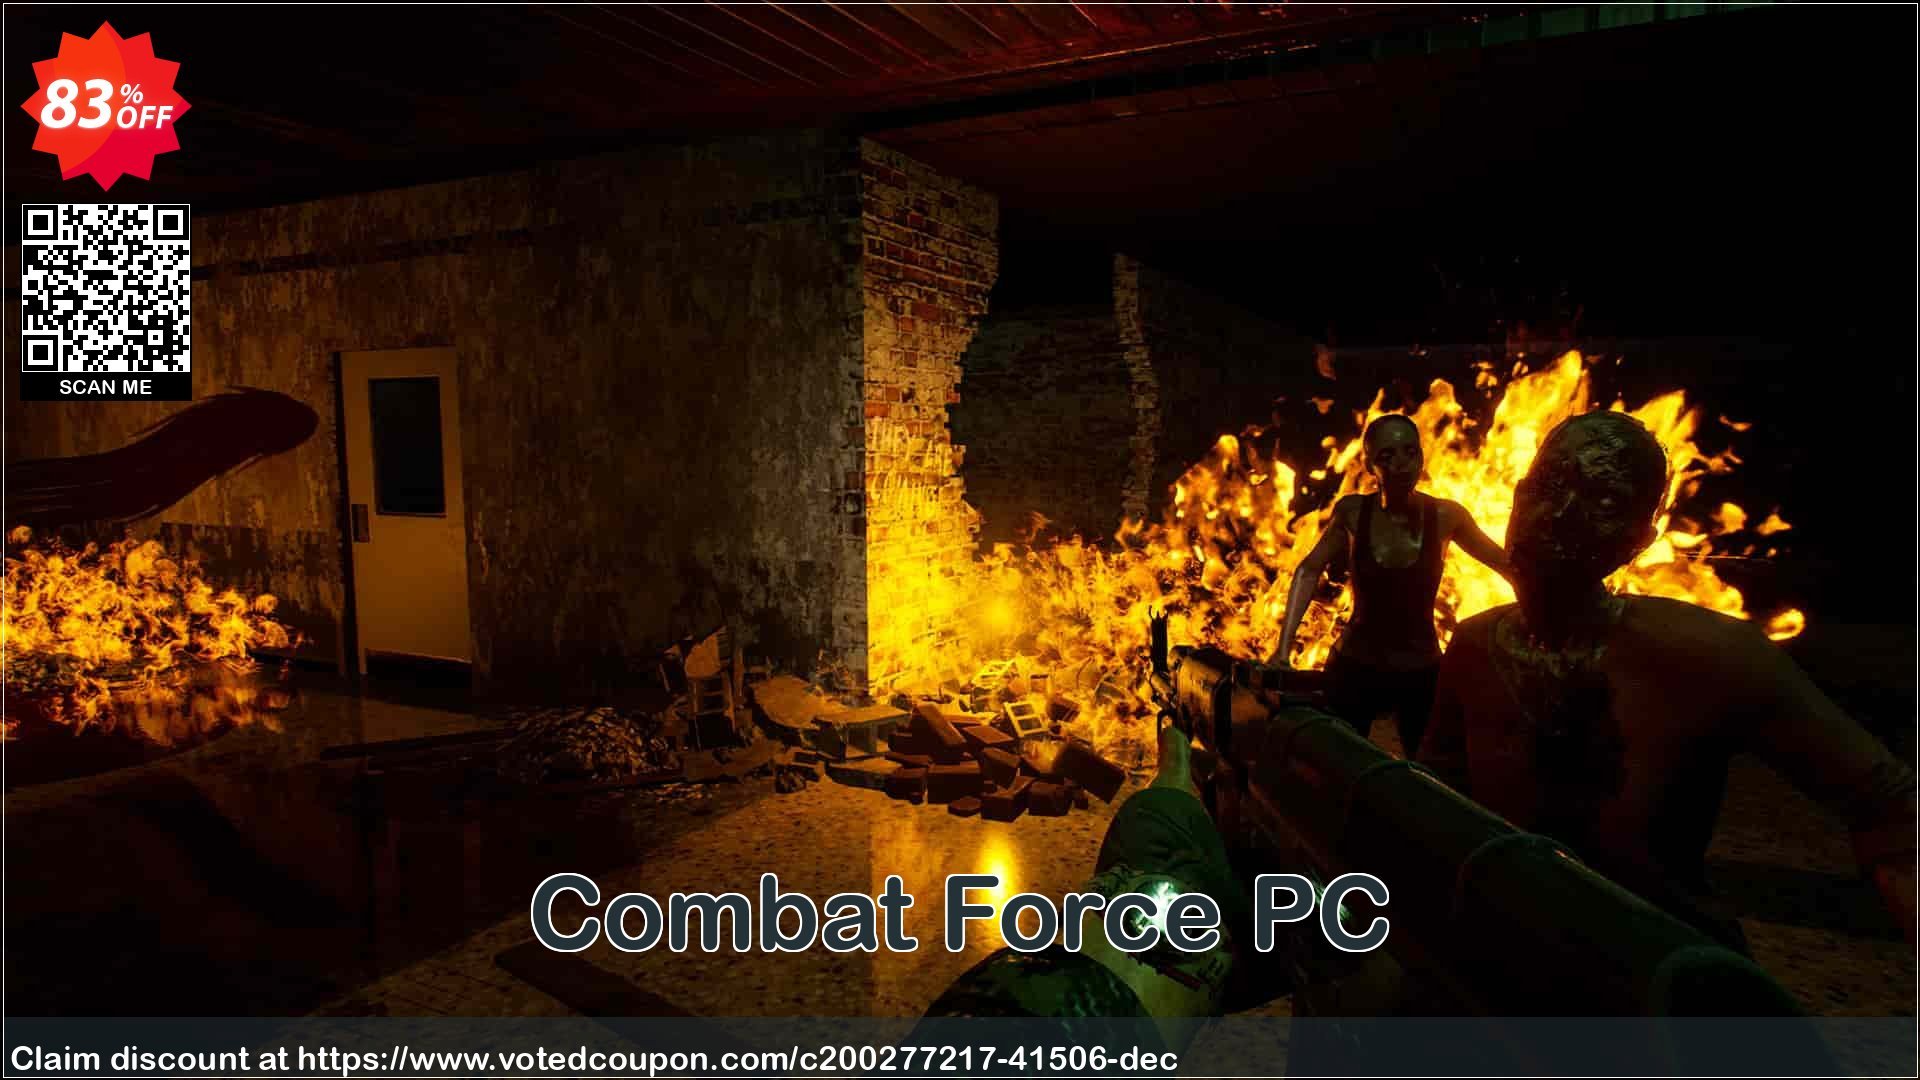 Combat Force PC Coupon Code May 2024, 83% OFF - VotedCoupon